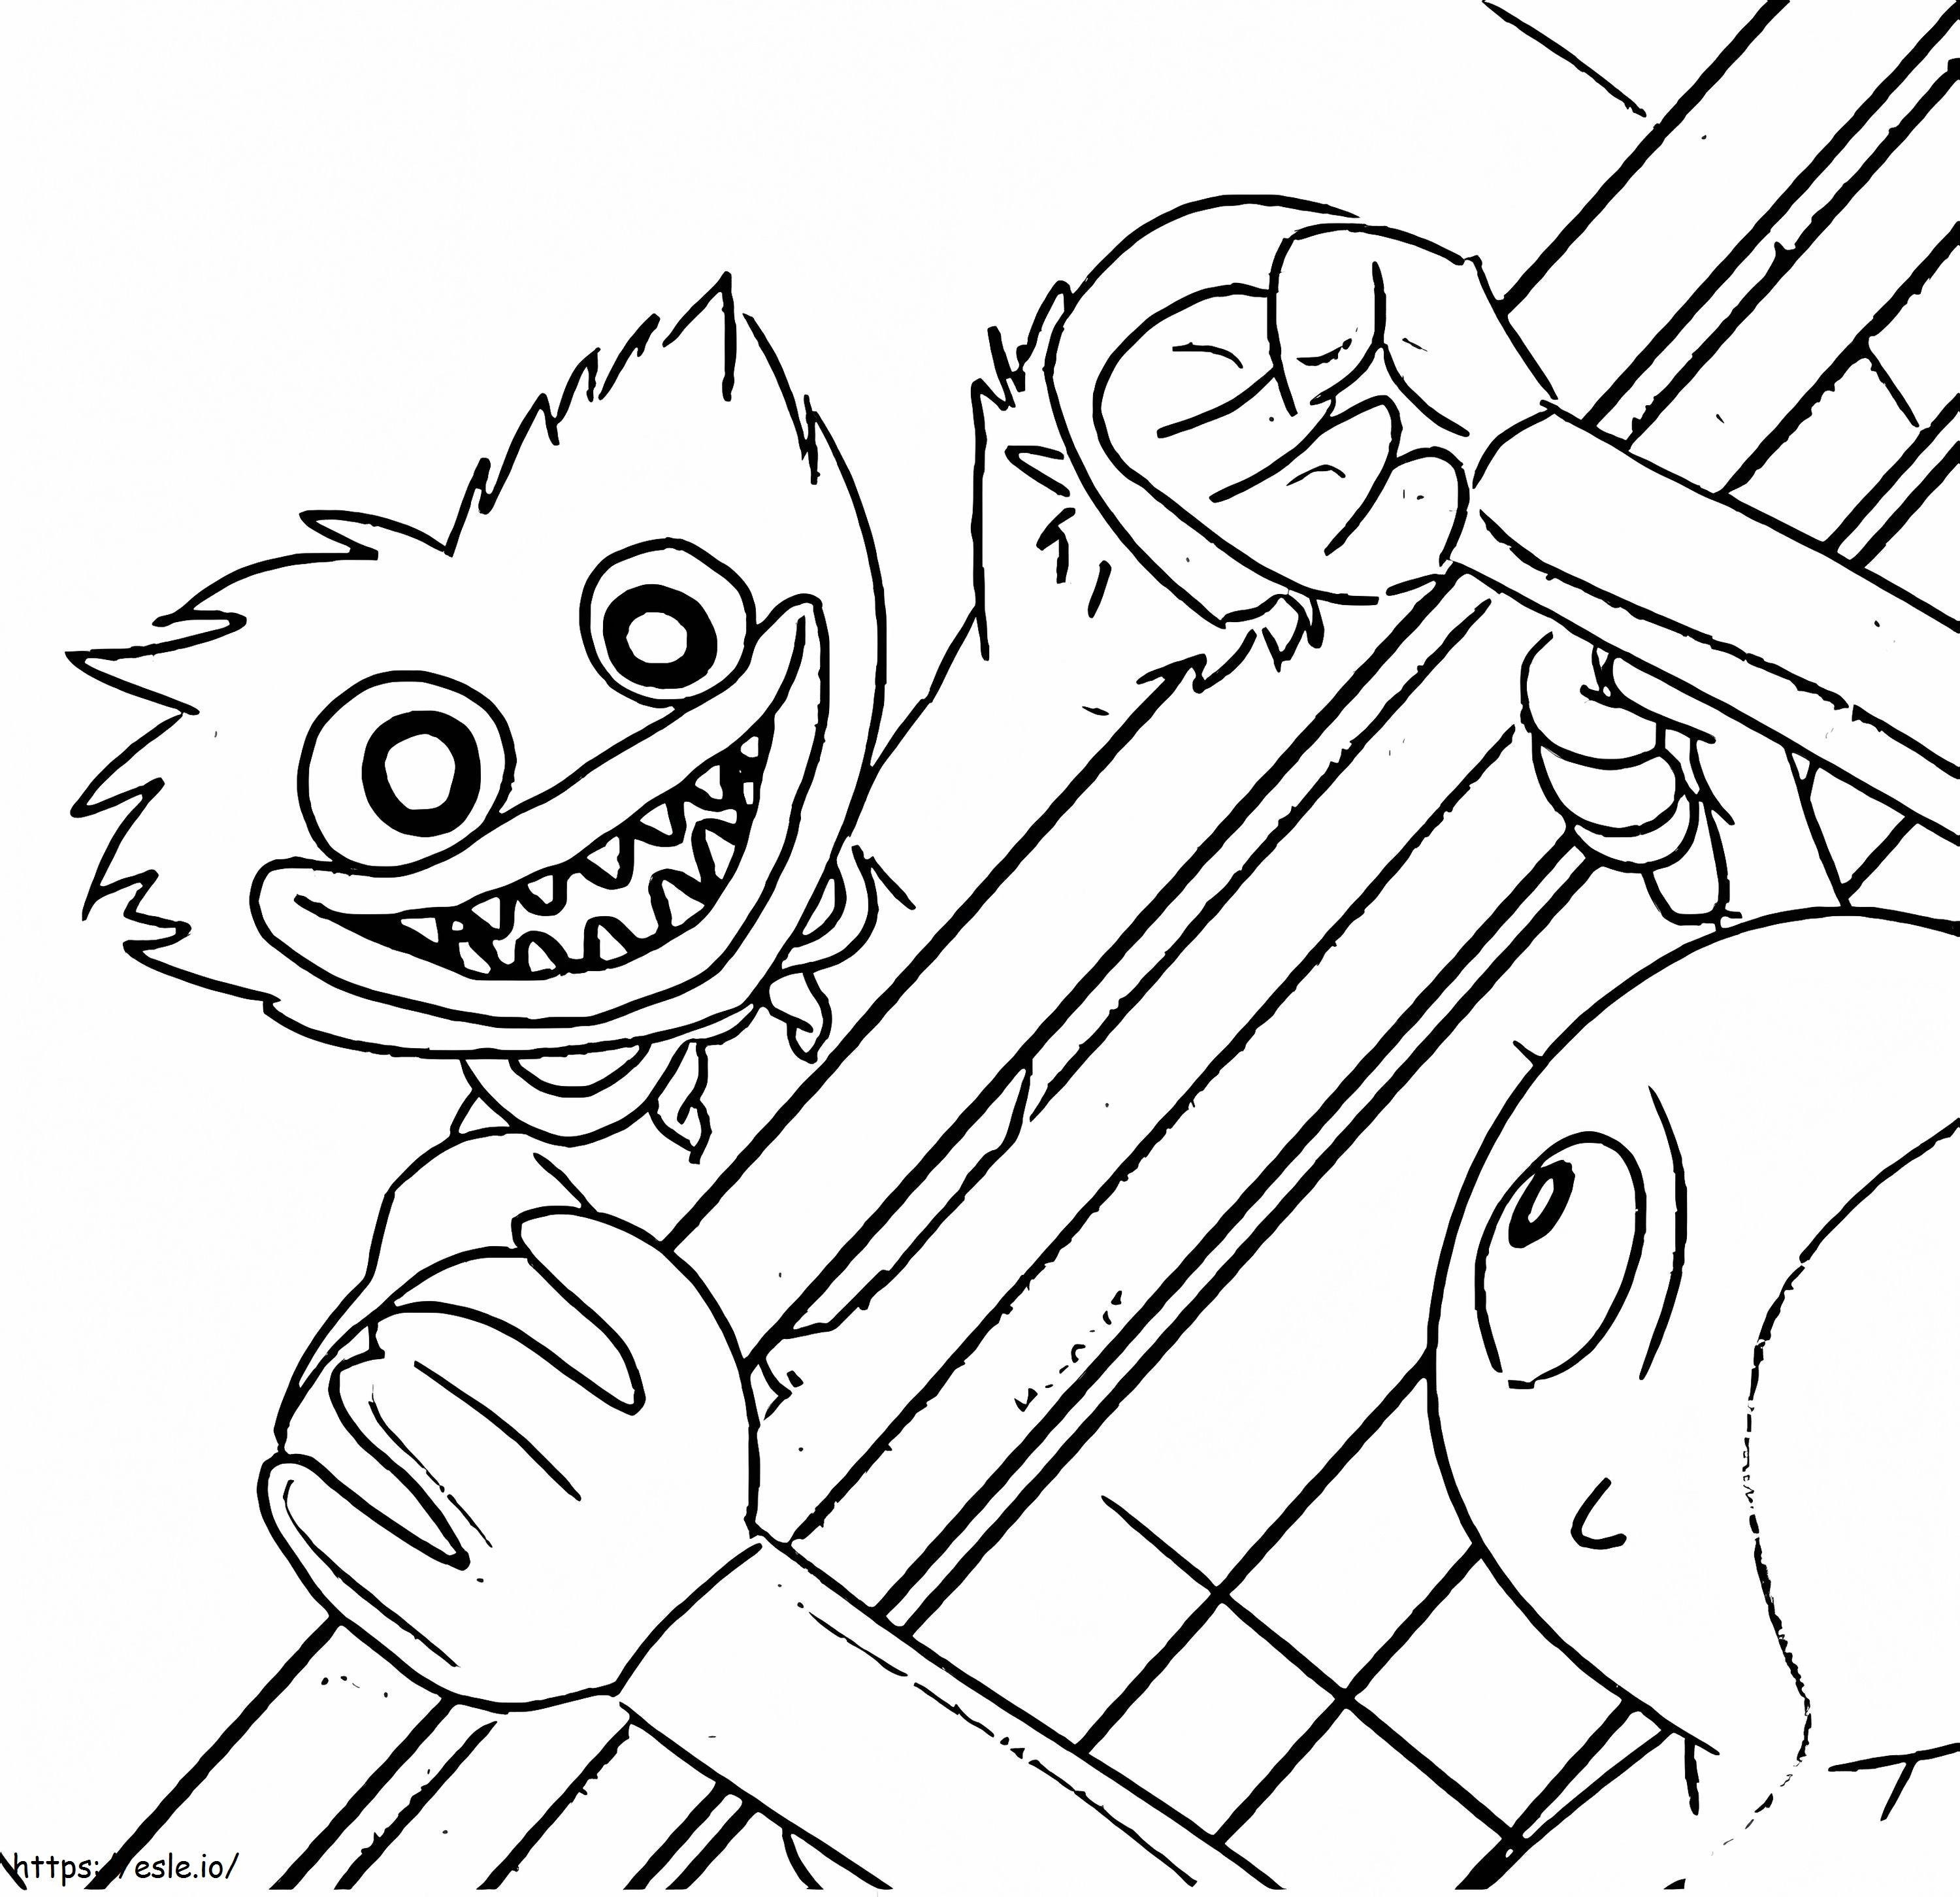 Scary Huggy Wuggy coloring page